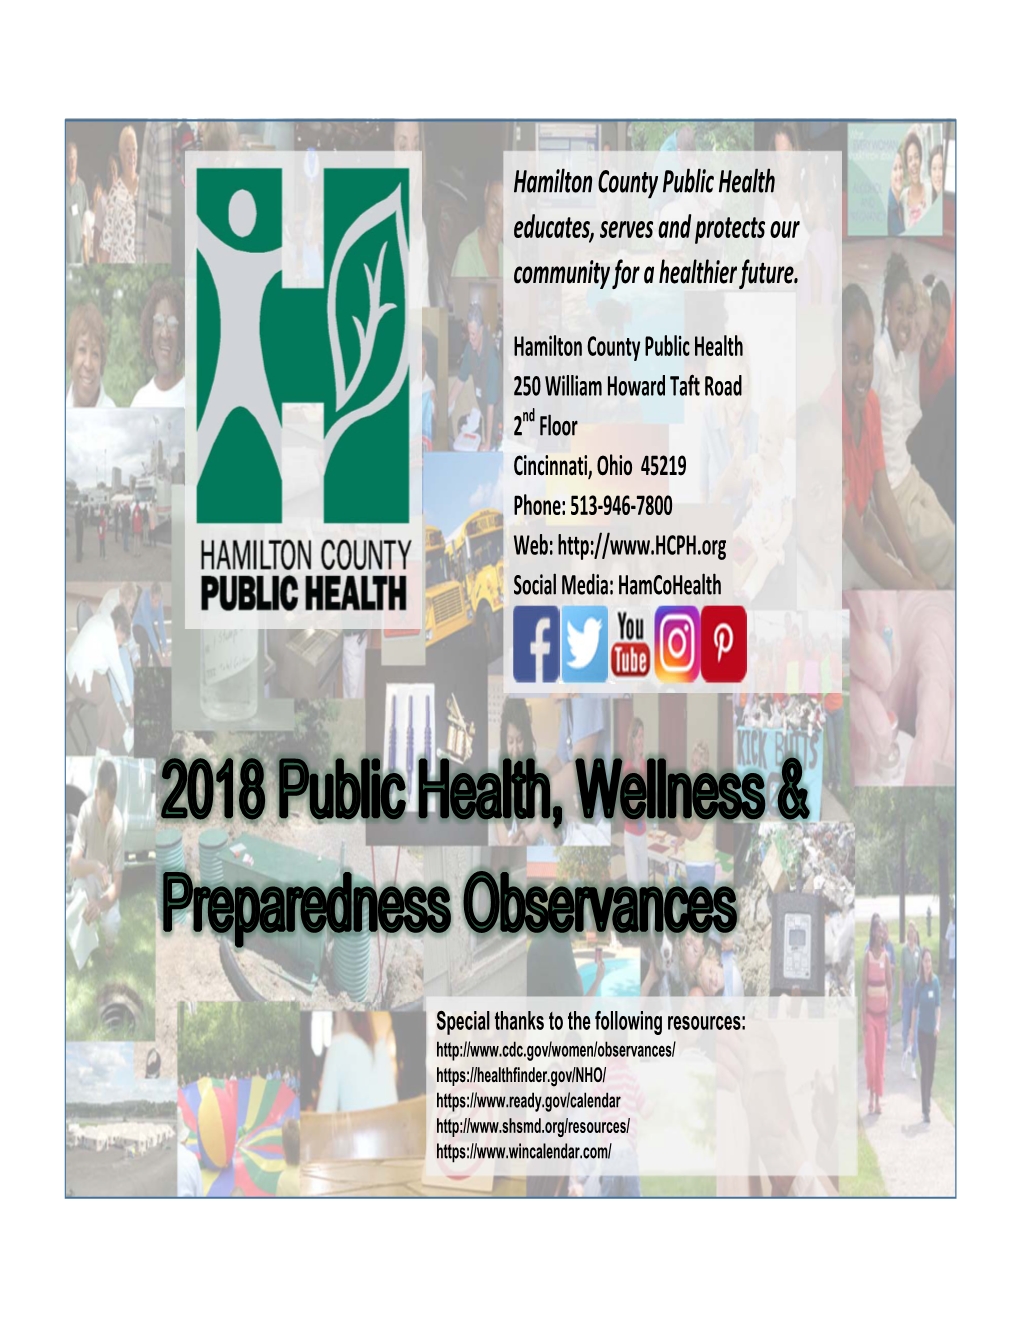 Hamilton County Public Health Educates, Serves and Protects Our Community for a Healthier Future